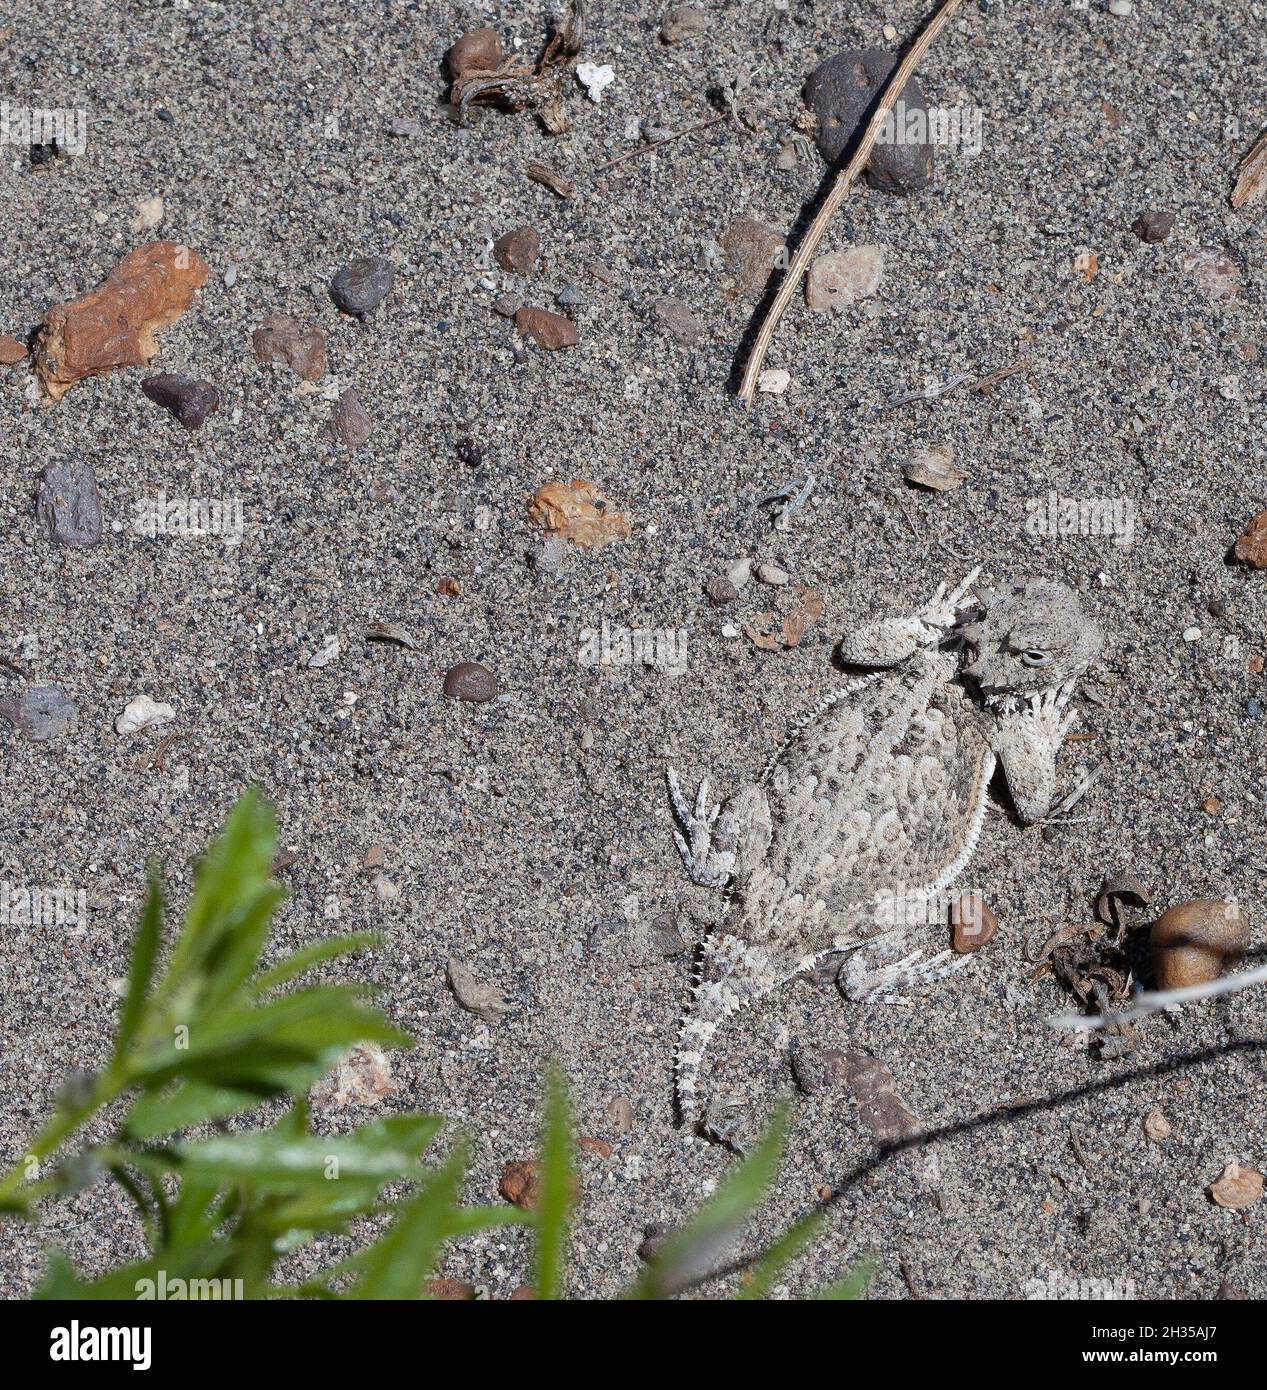 A Desert Horned Lizard (Phrynosoma platyrhinos) blends in with the sand at Bruneau Dunes State Park, Idaho. Stock Photo